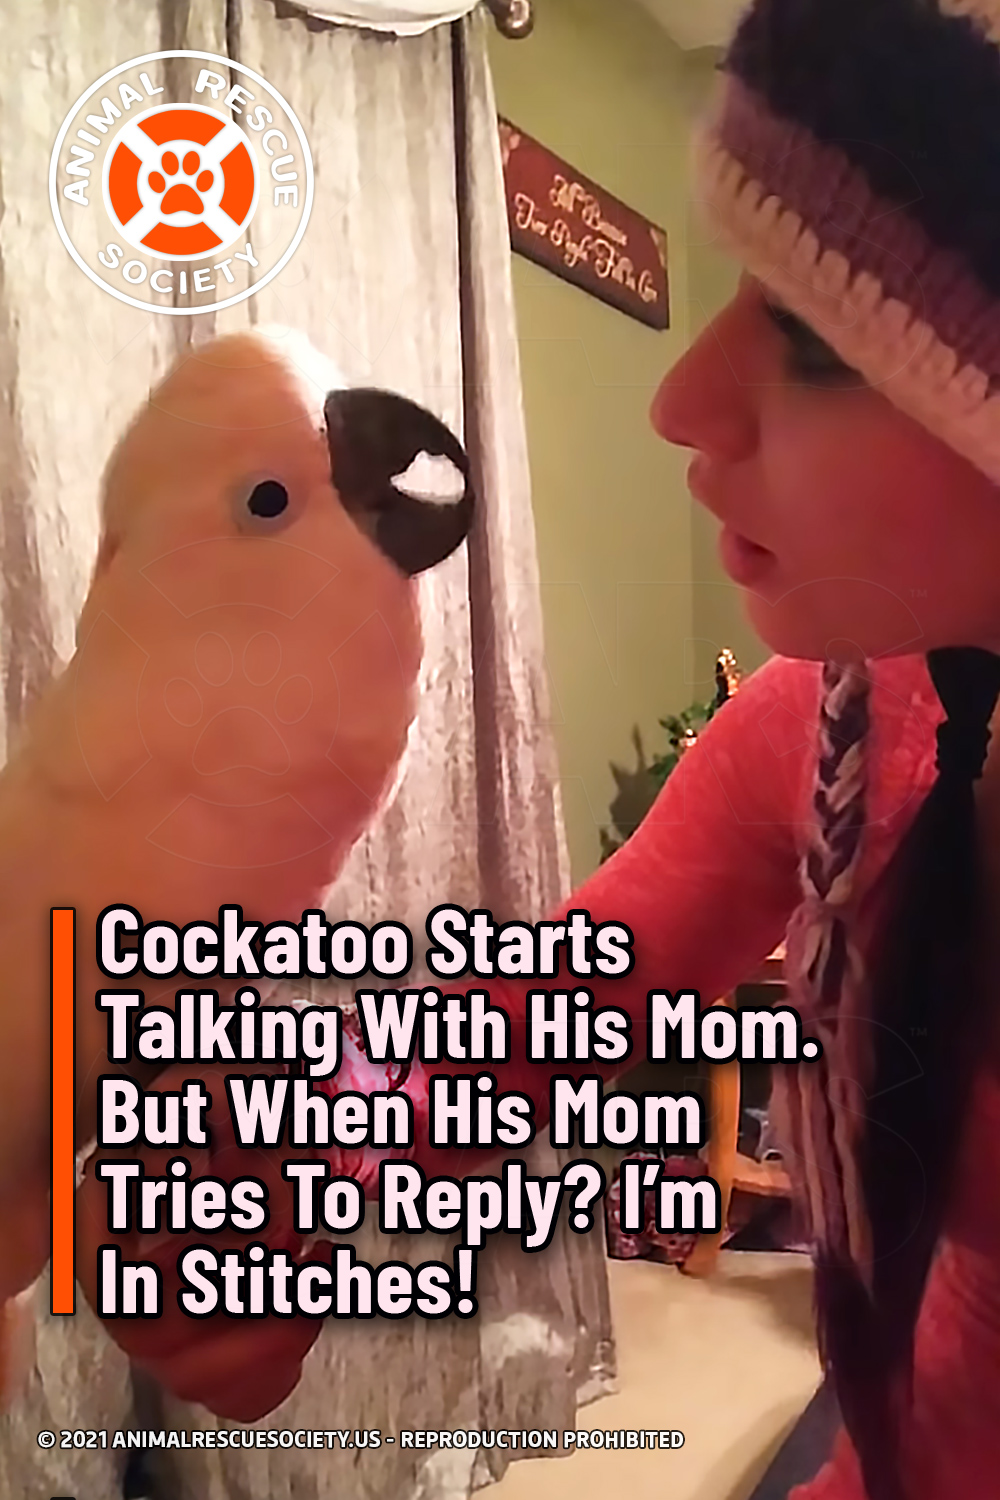 Cockatoo Starts Talking With His Mom. But When His Mom Tries To Reply? I’m In Stitches!